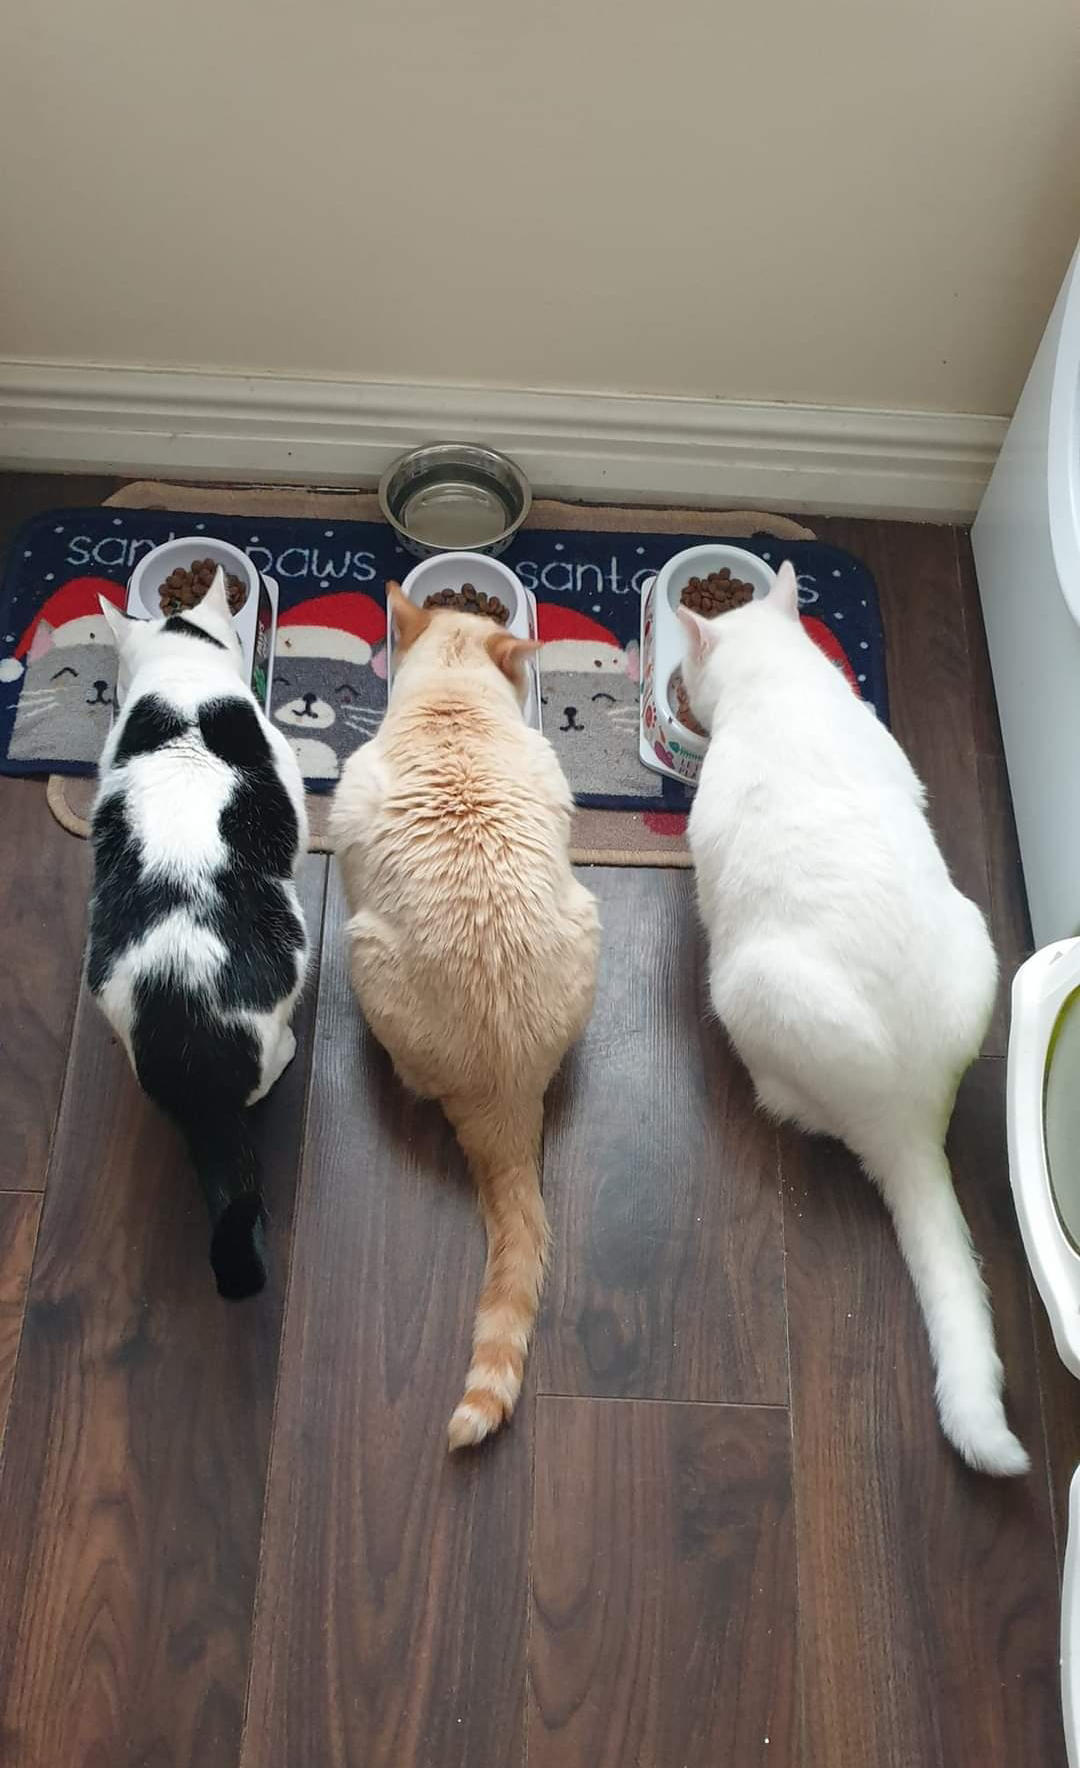 Three of Beck'y cats eating